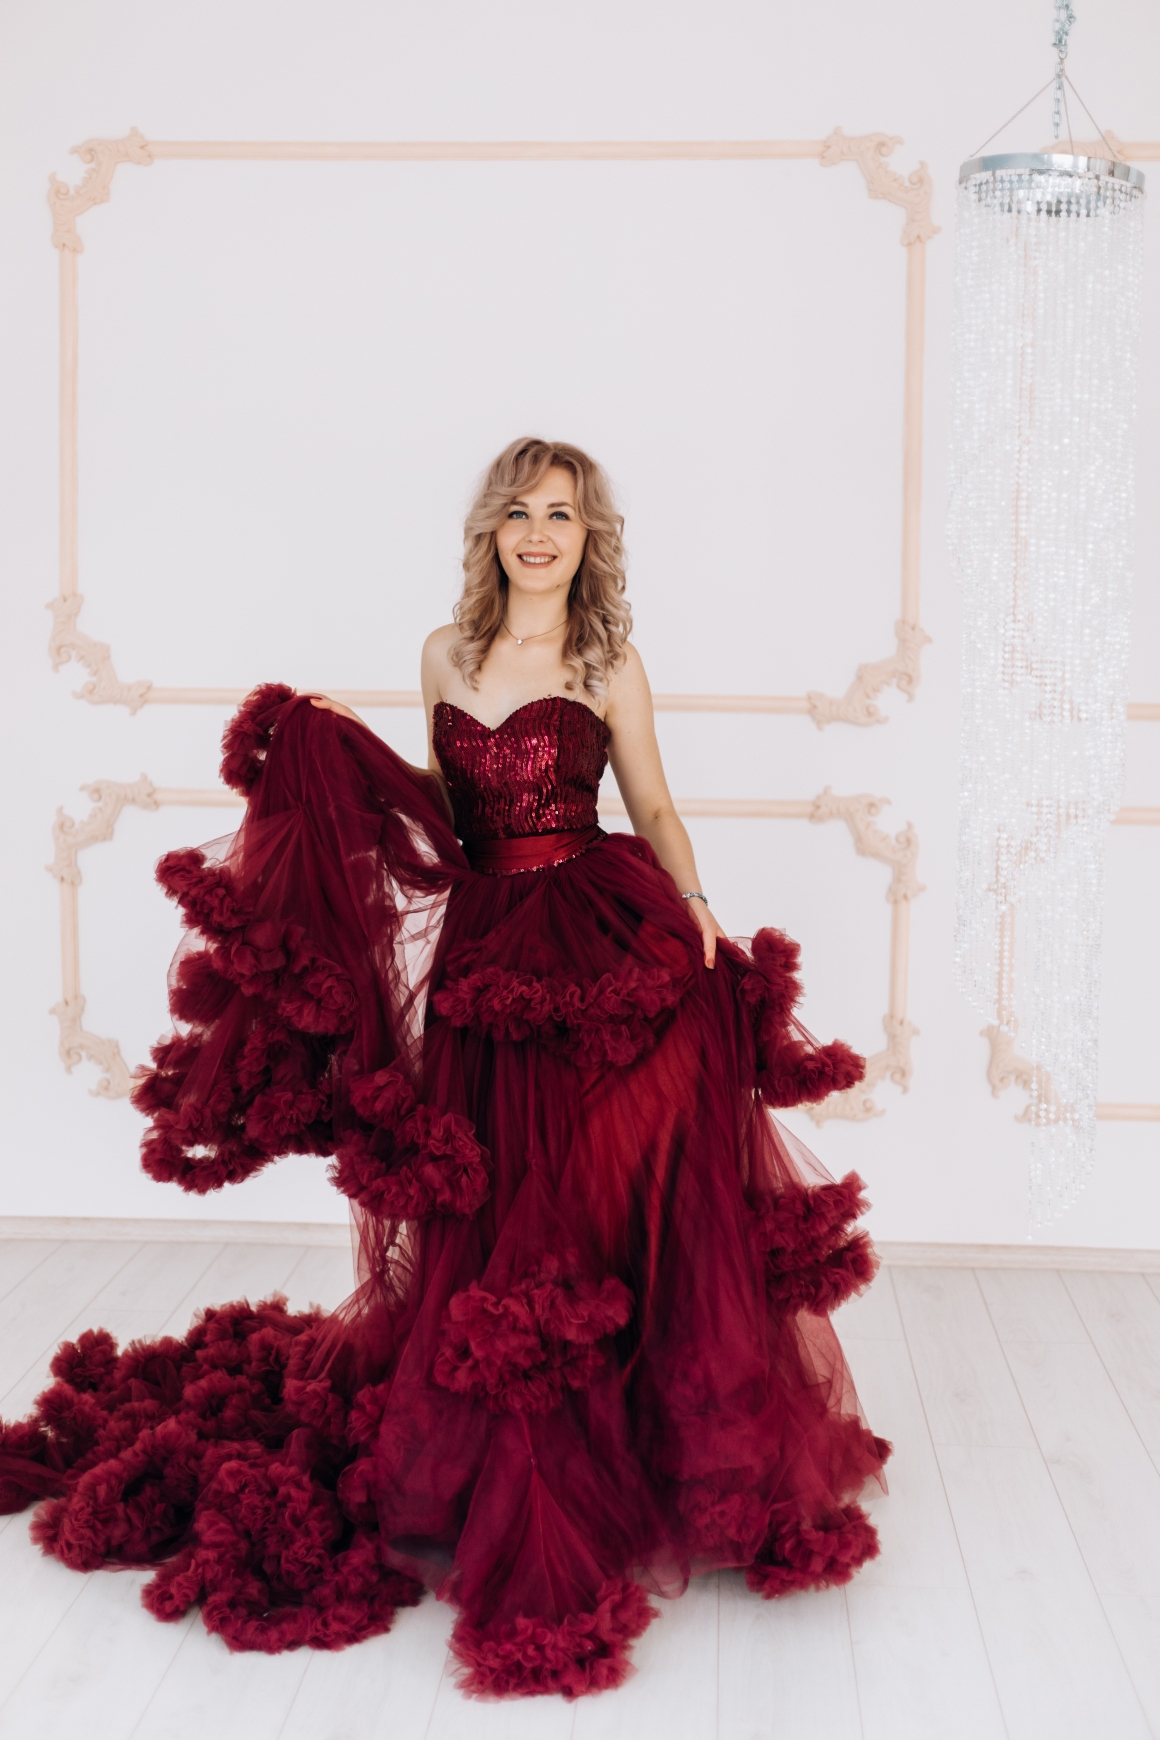 adorable-woman-red-burgundi-dress-poses-bright-luxury-room-with-large-chandelier